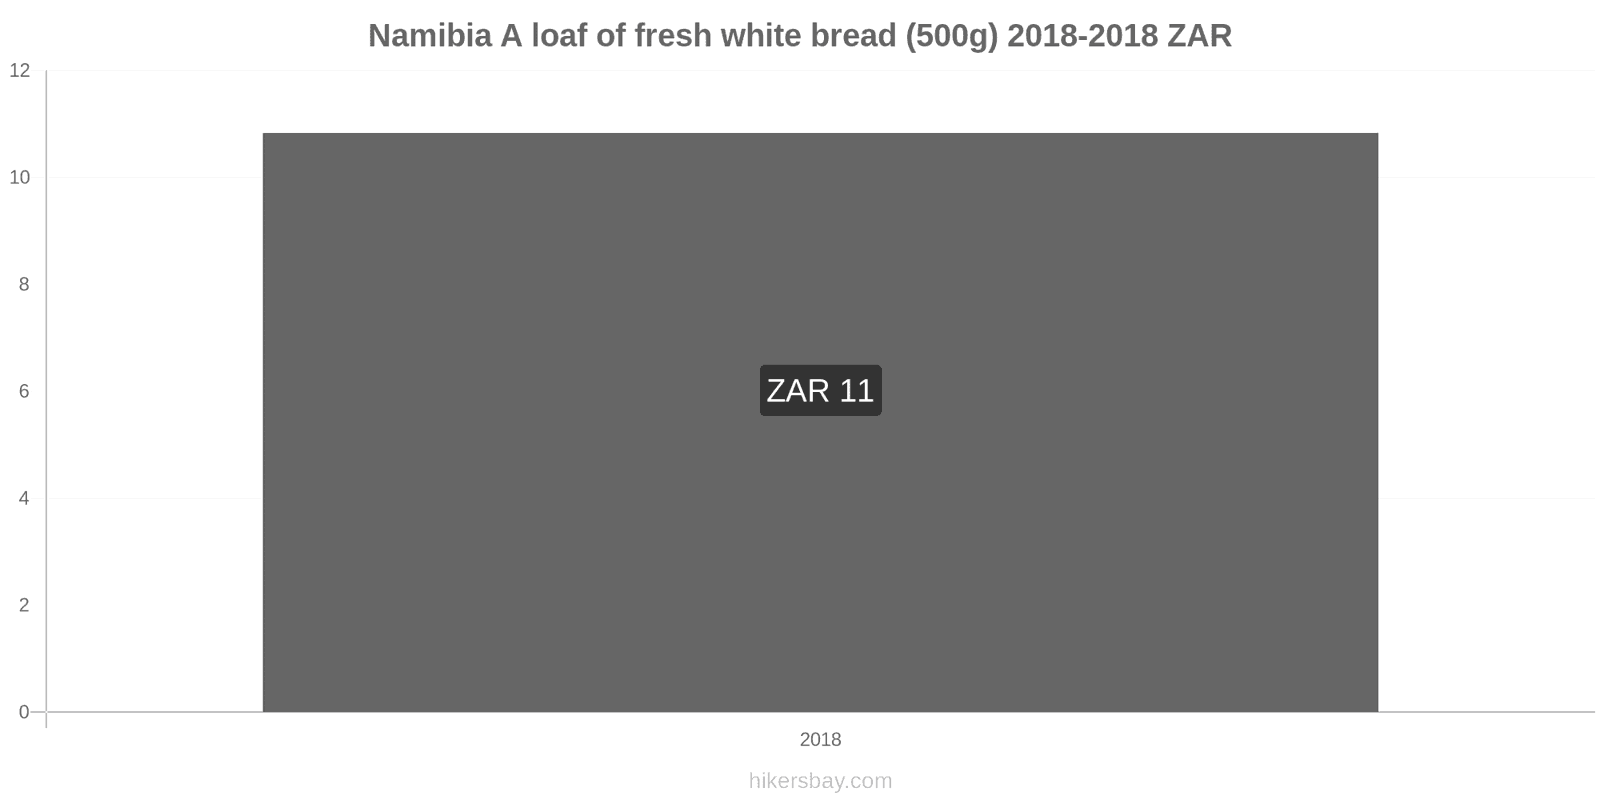 Namibia price changes A loaf of fresh white bread (500g) hikersbay.com